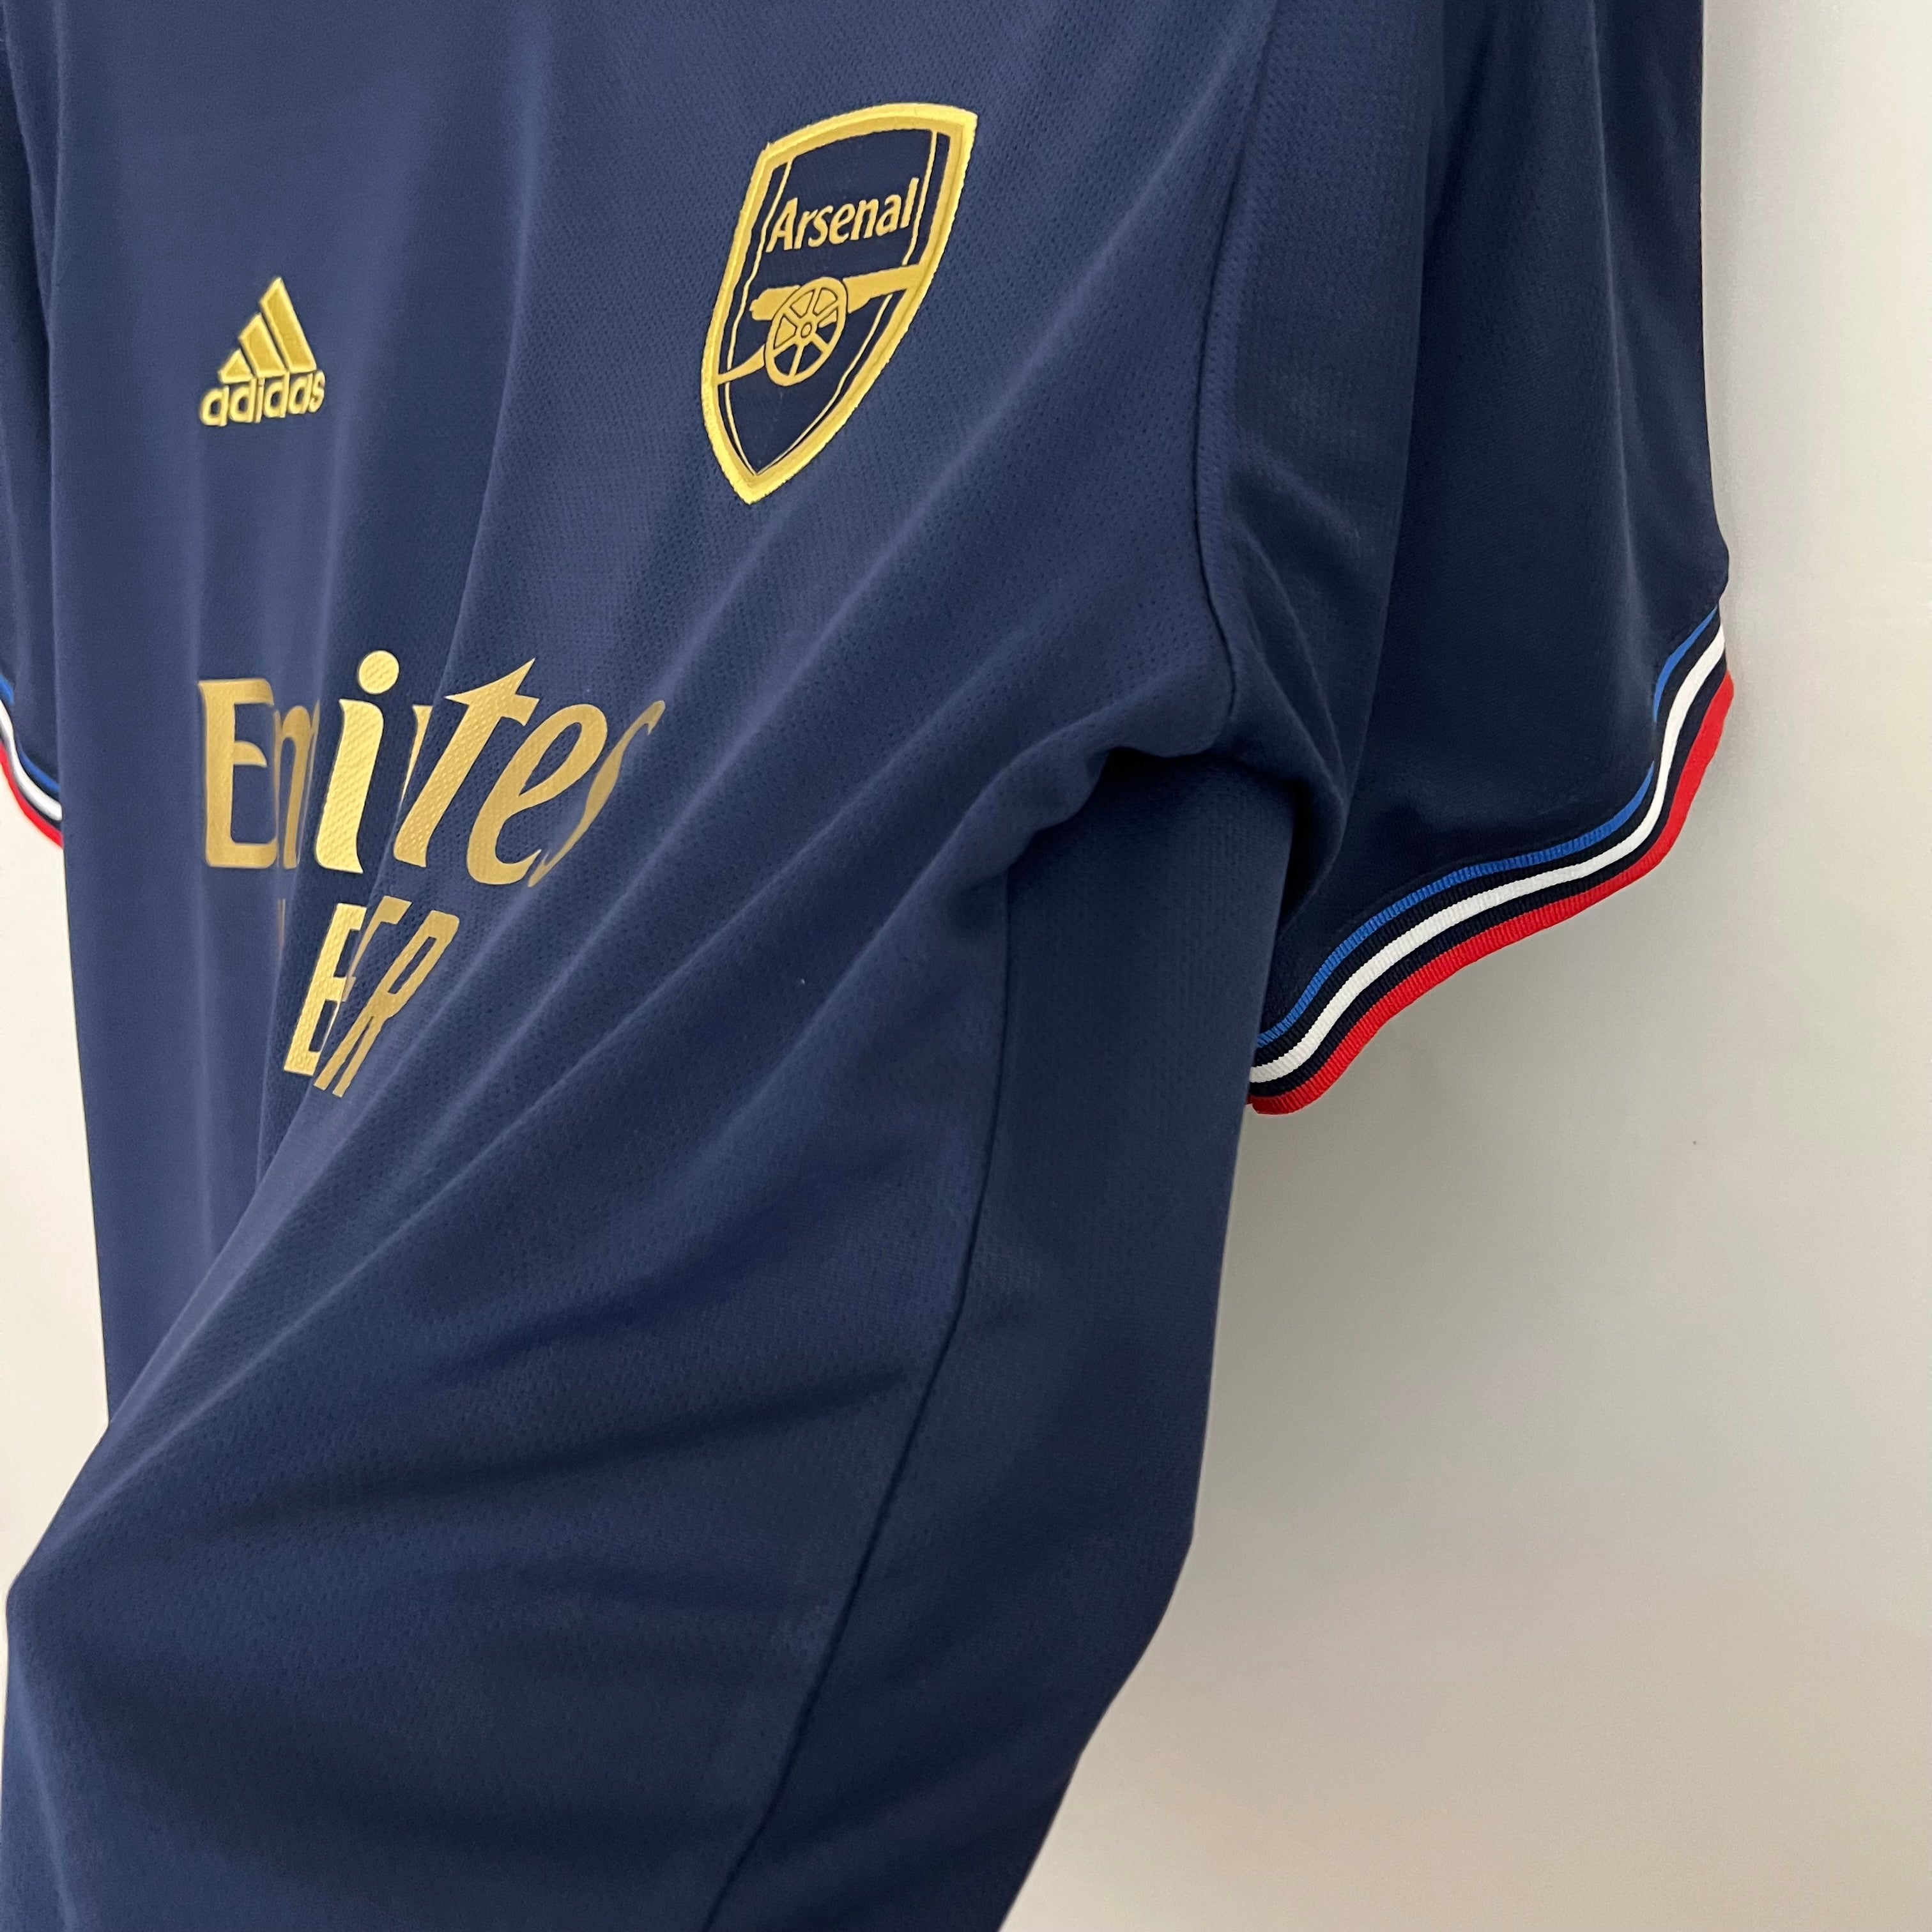 Arsenal France Joint Edition - 23/24